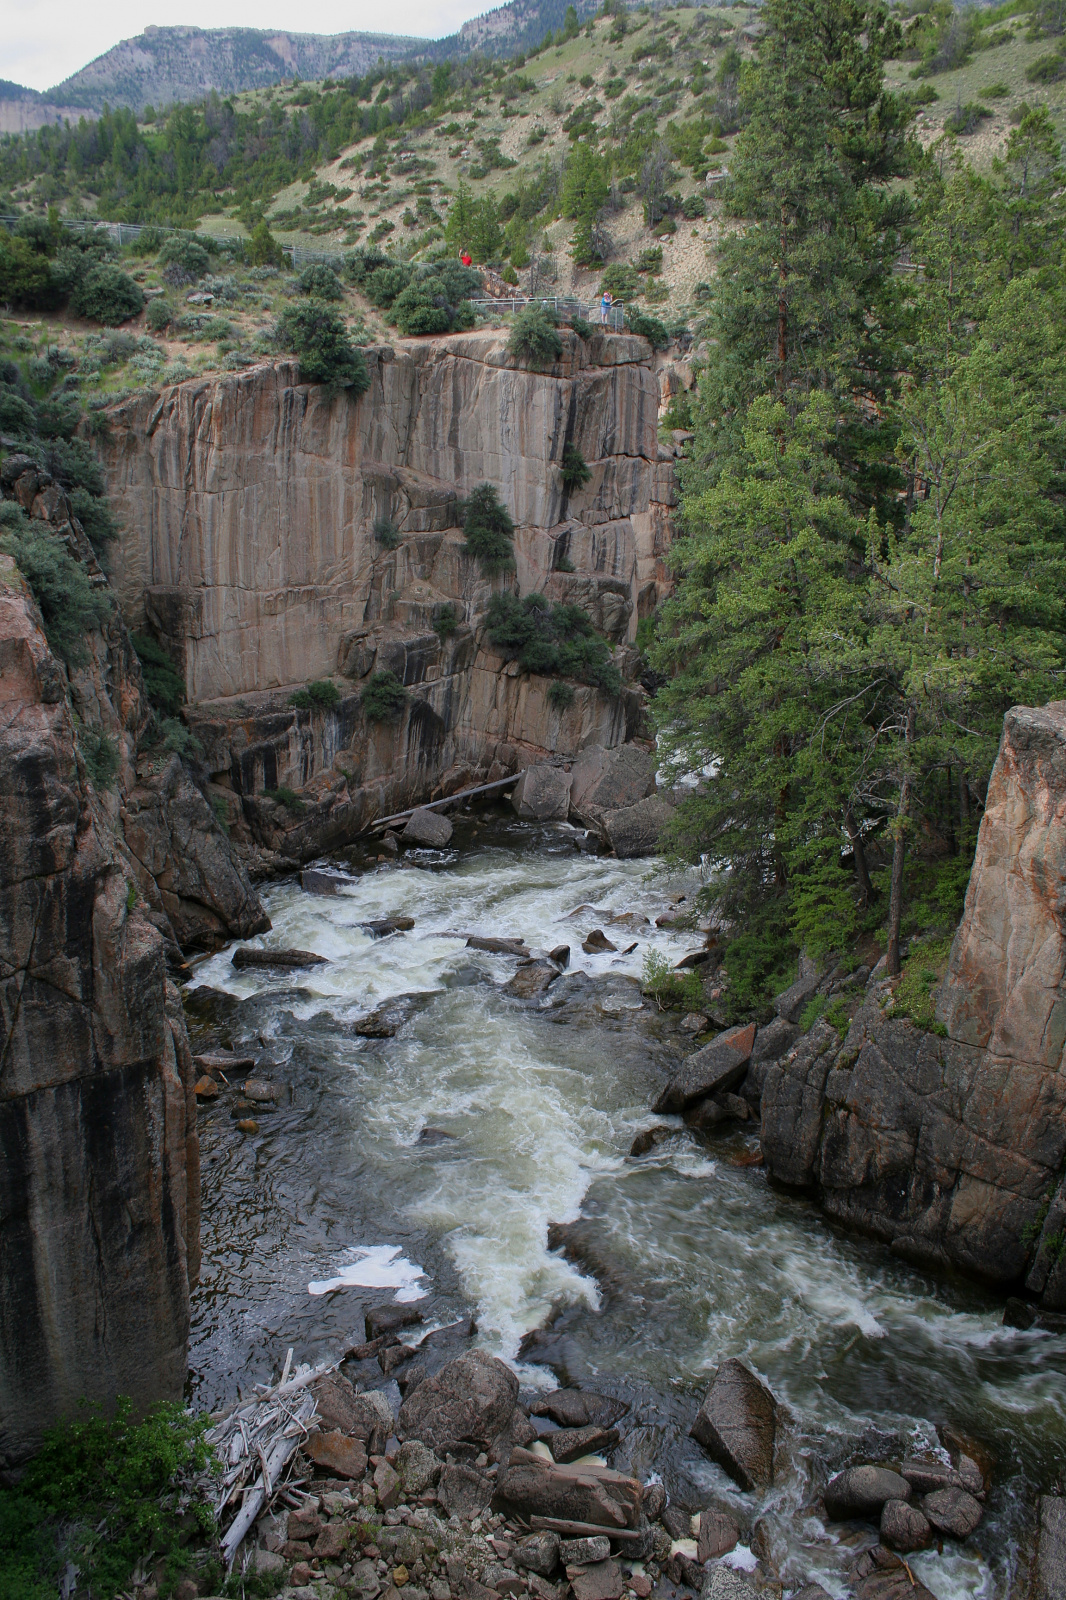 Shell Creek (Travels » US Trip 2: Cheyenne Epic » The Country » Bighorn Mountains » Shell Canyon and Falls)